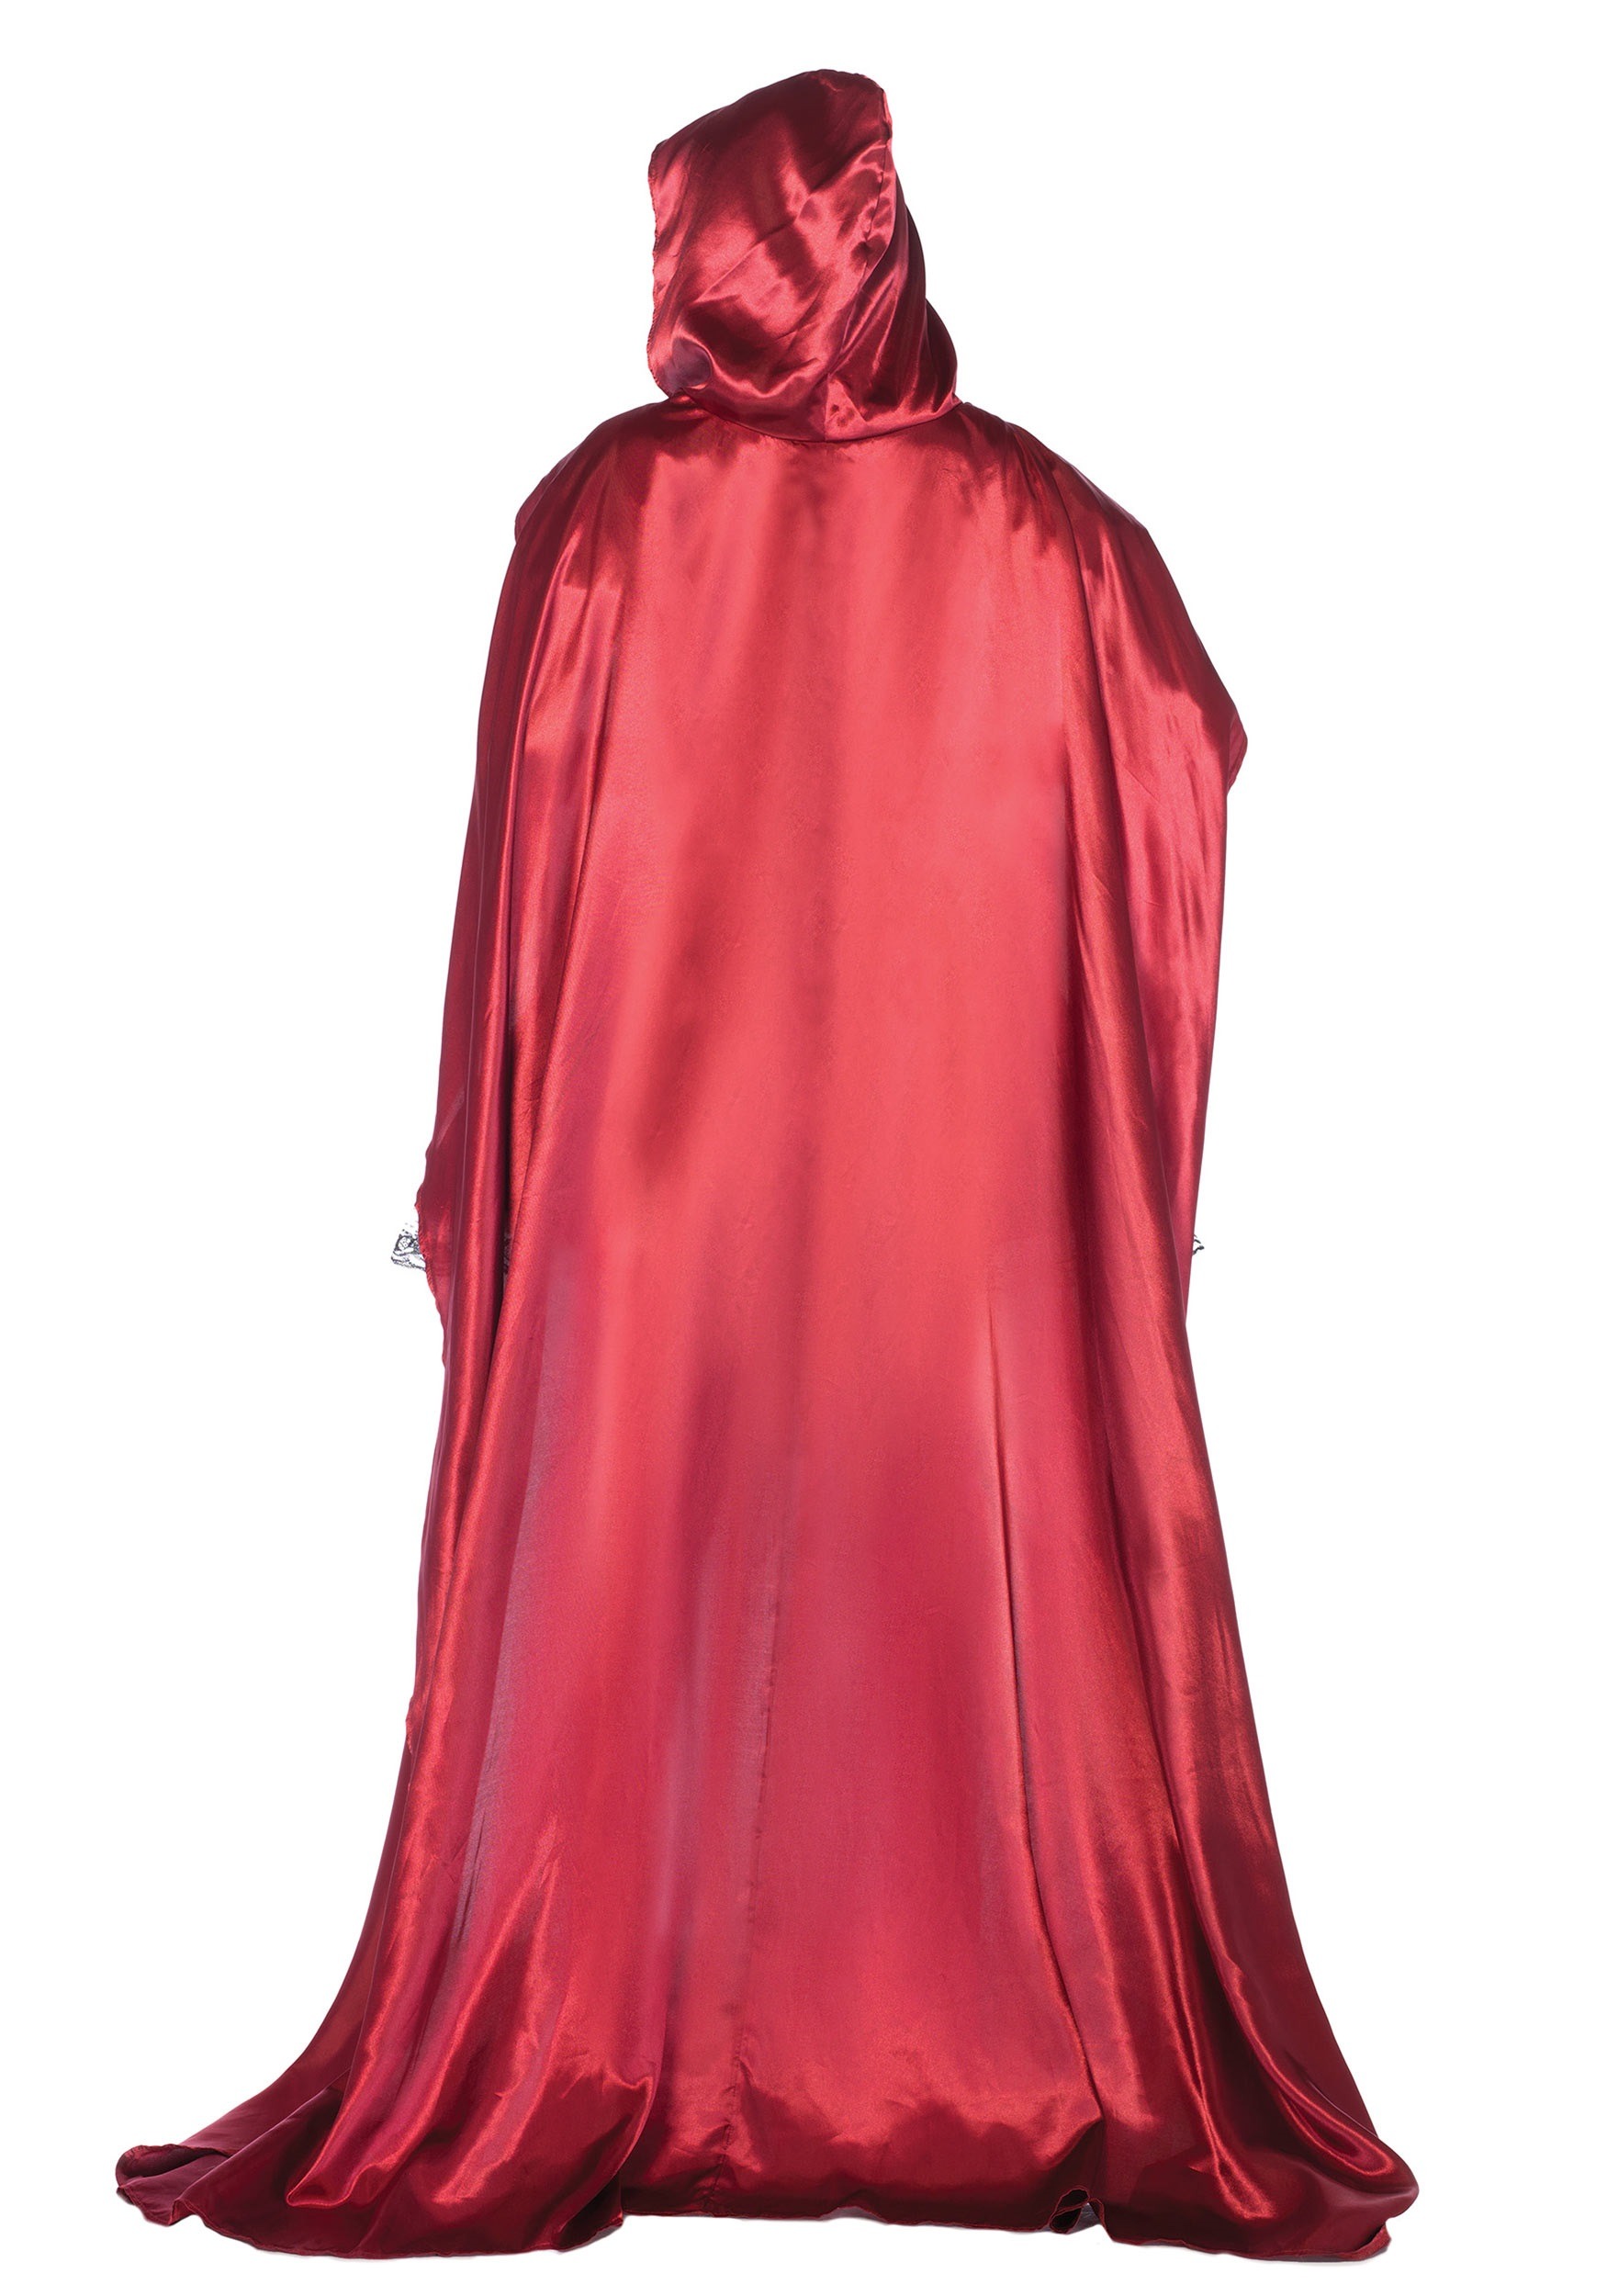 Women's Captivating Miss Red Costume